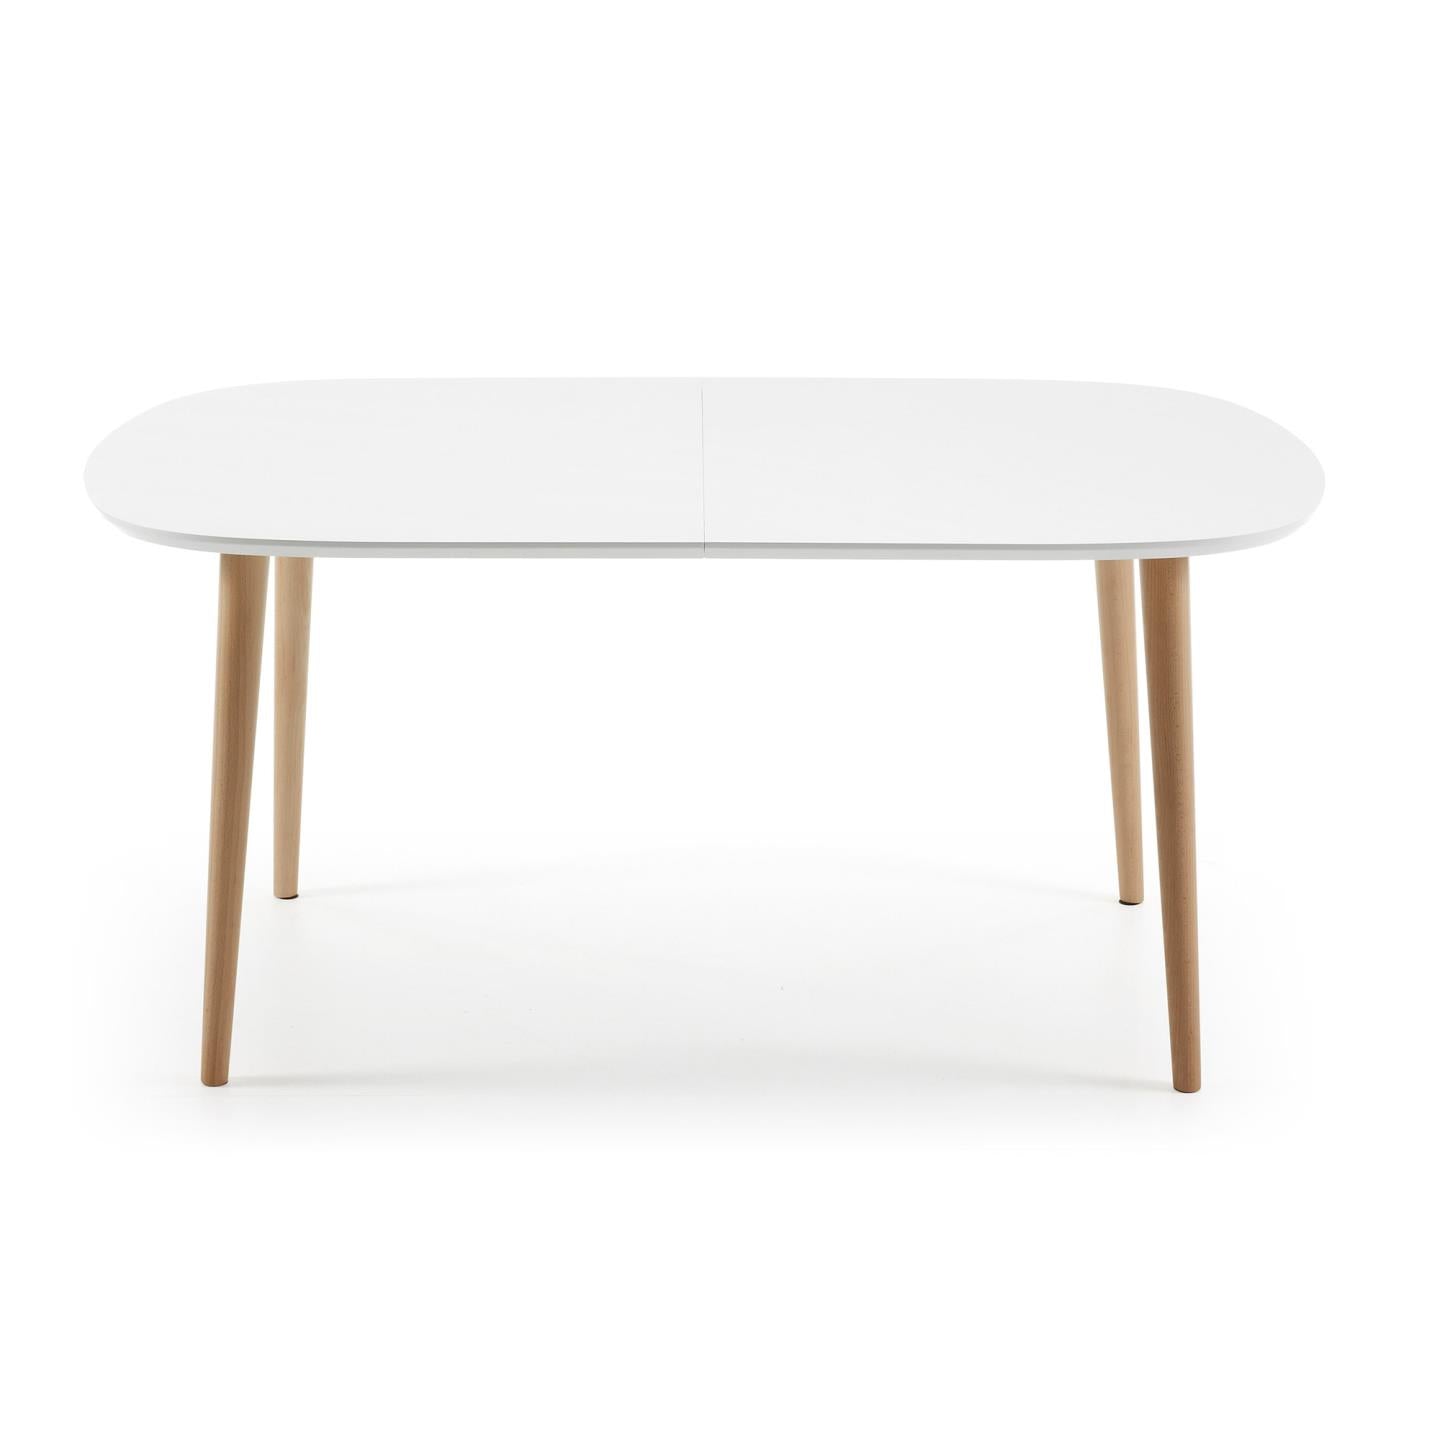 Oqui extendable oval table with an oak veneer and solid wood legs, Ø 160 (260) x 100 cm